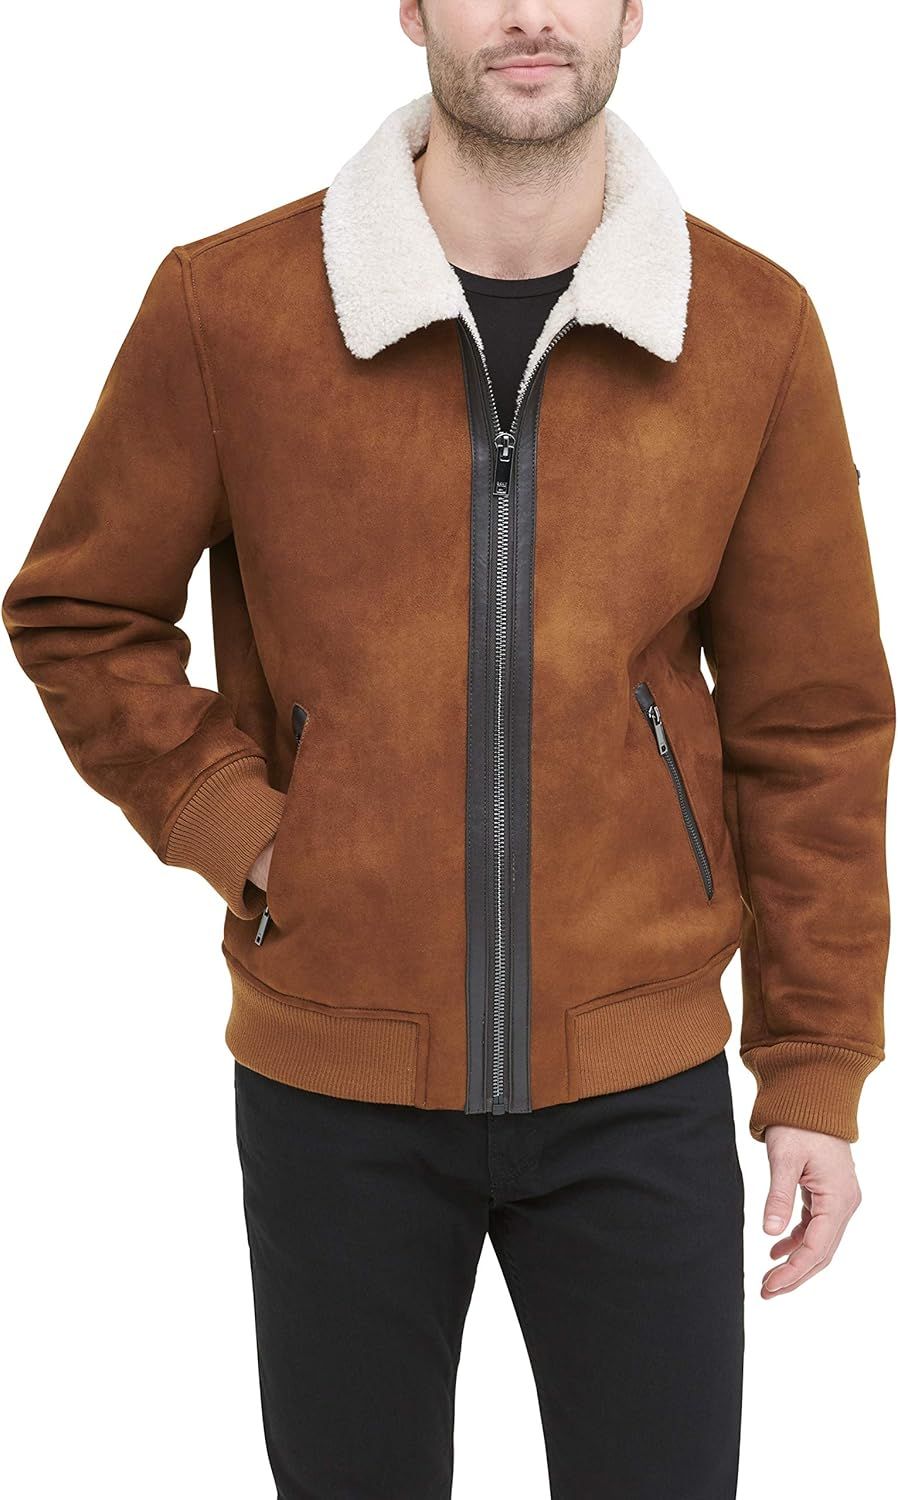 DKNY Men's Shearling Bomber Jacket with Faux Fur Collar | Amazon (US)